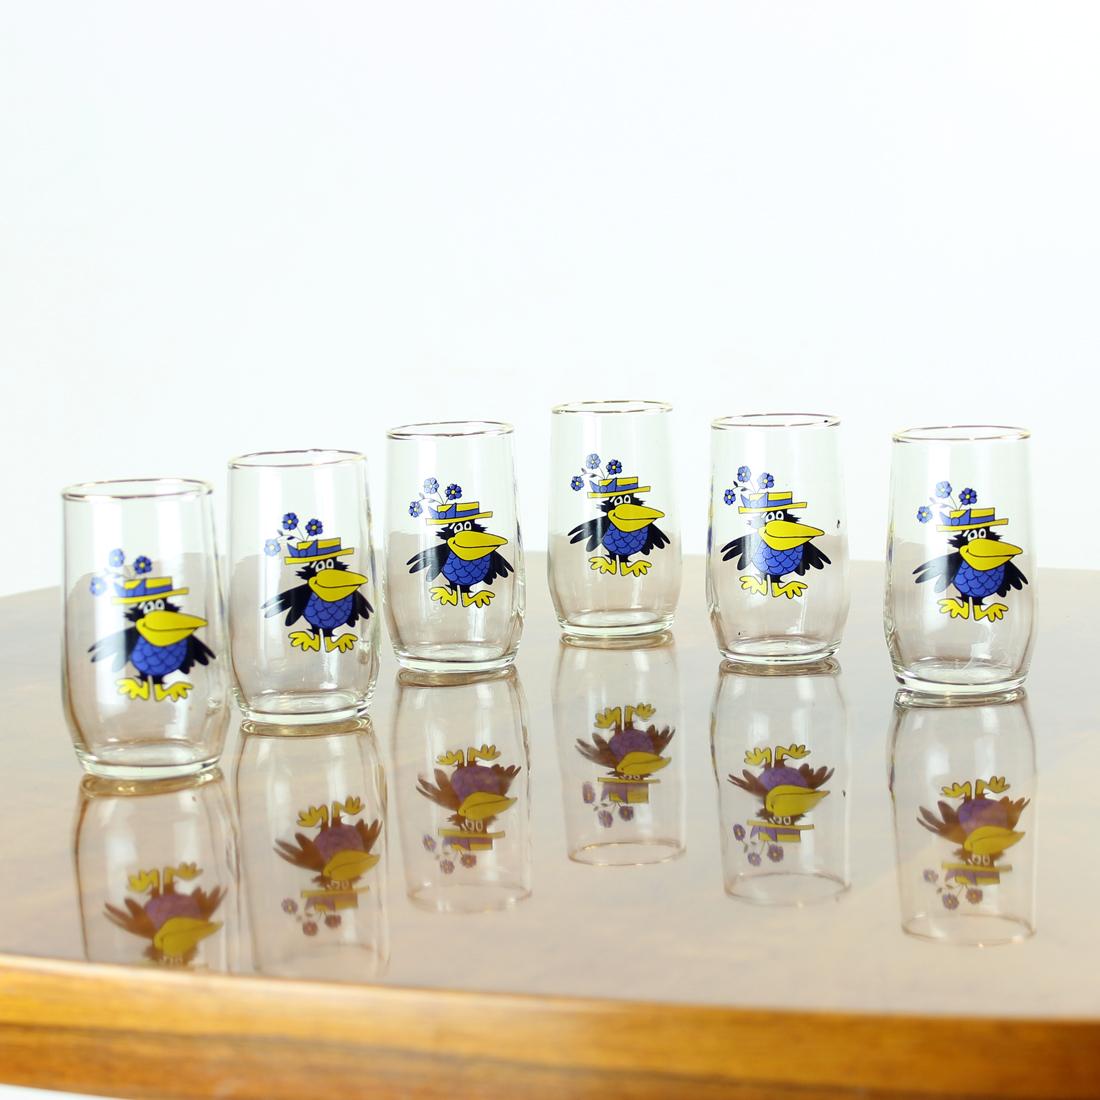 Beautiful set of 6 glasses from mid-century modern design era. The set was produced in 1960s and nevee been used. It is made of a clear Bohemian glass with print of a colorful cartoon bird on on the side. The top rim is finished with gold. Excellent